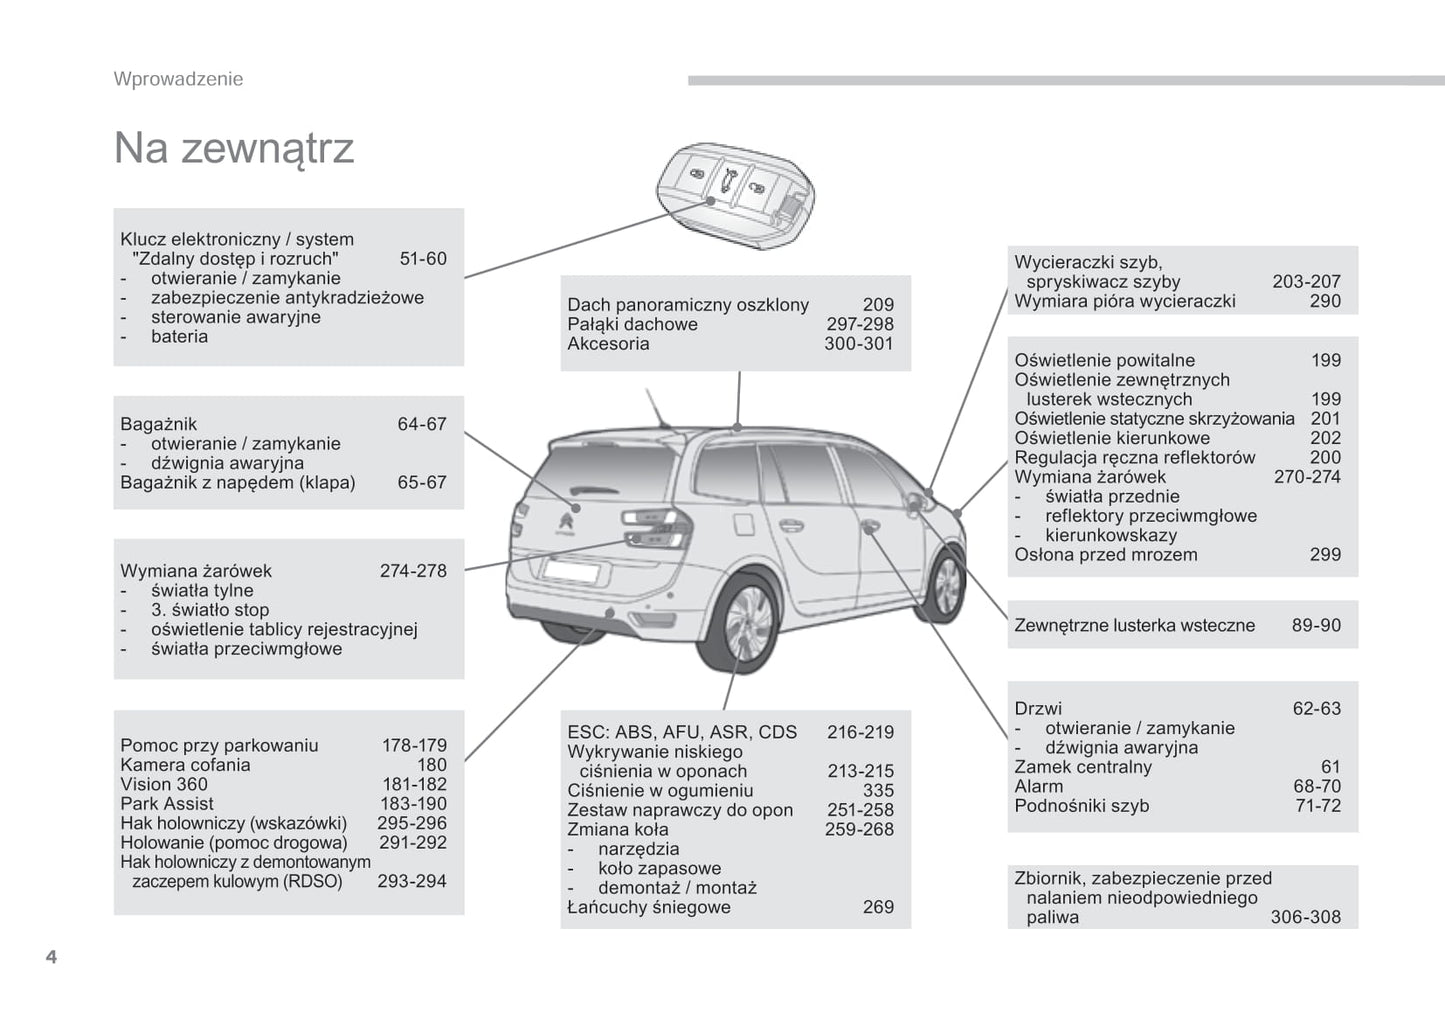 2015-2016 Citroën C4 Picasso/Grand C4 Picasso Owner's Manual | Polish